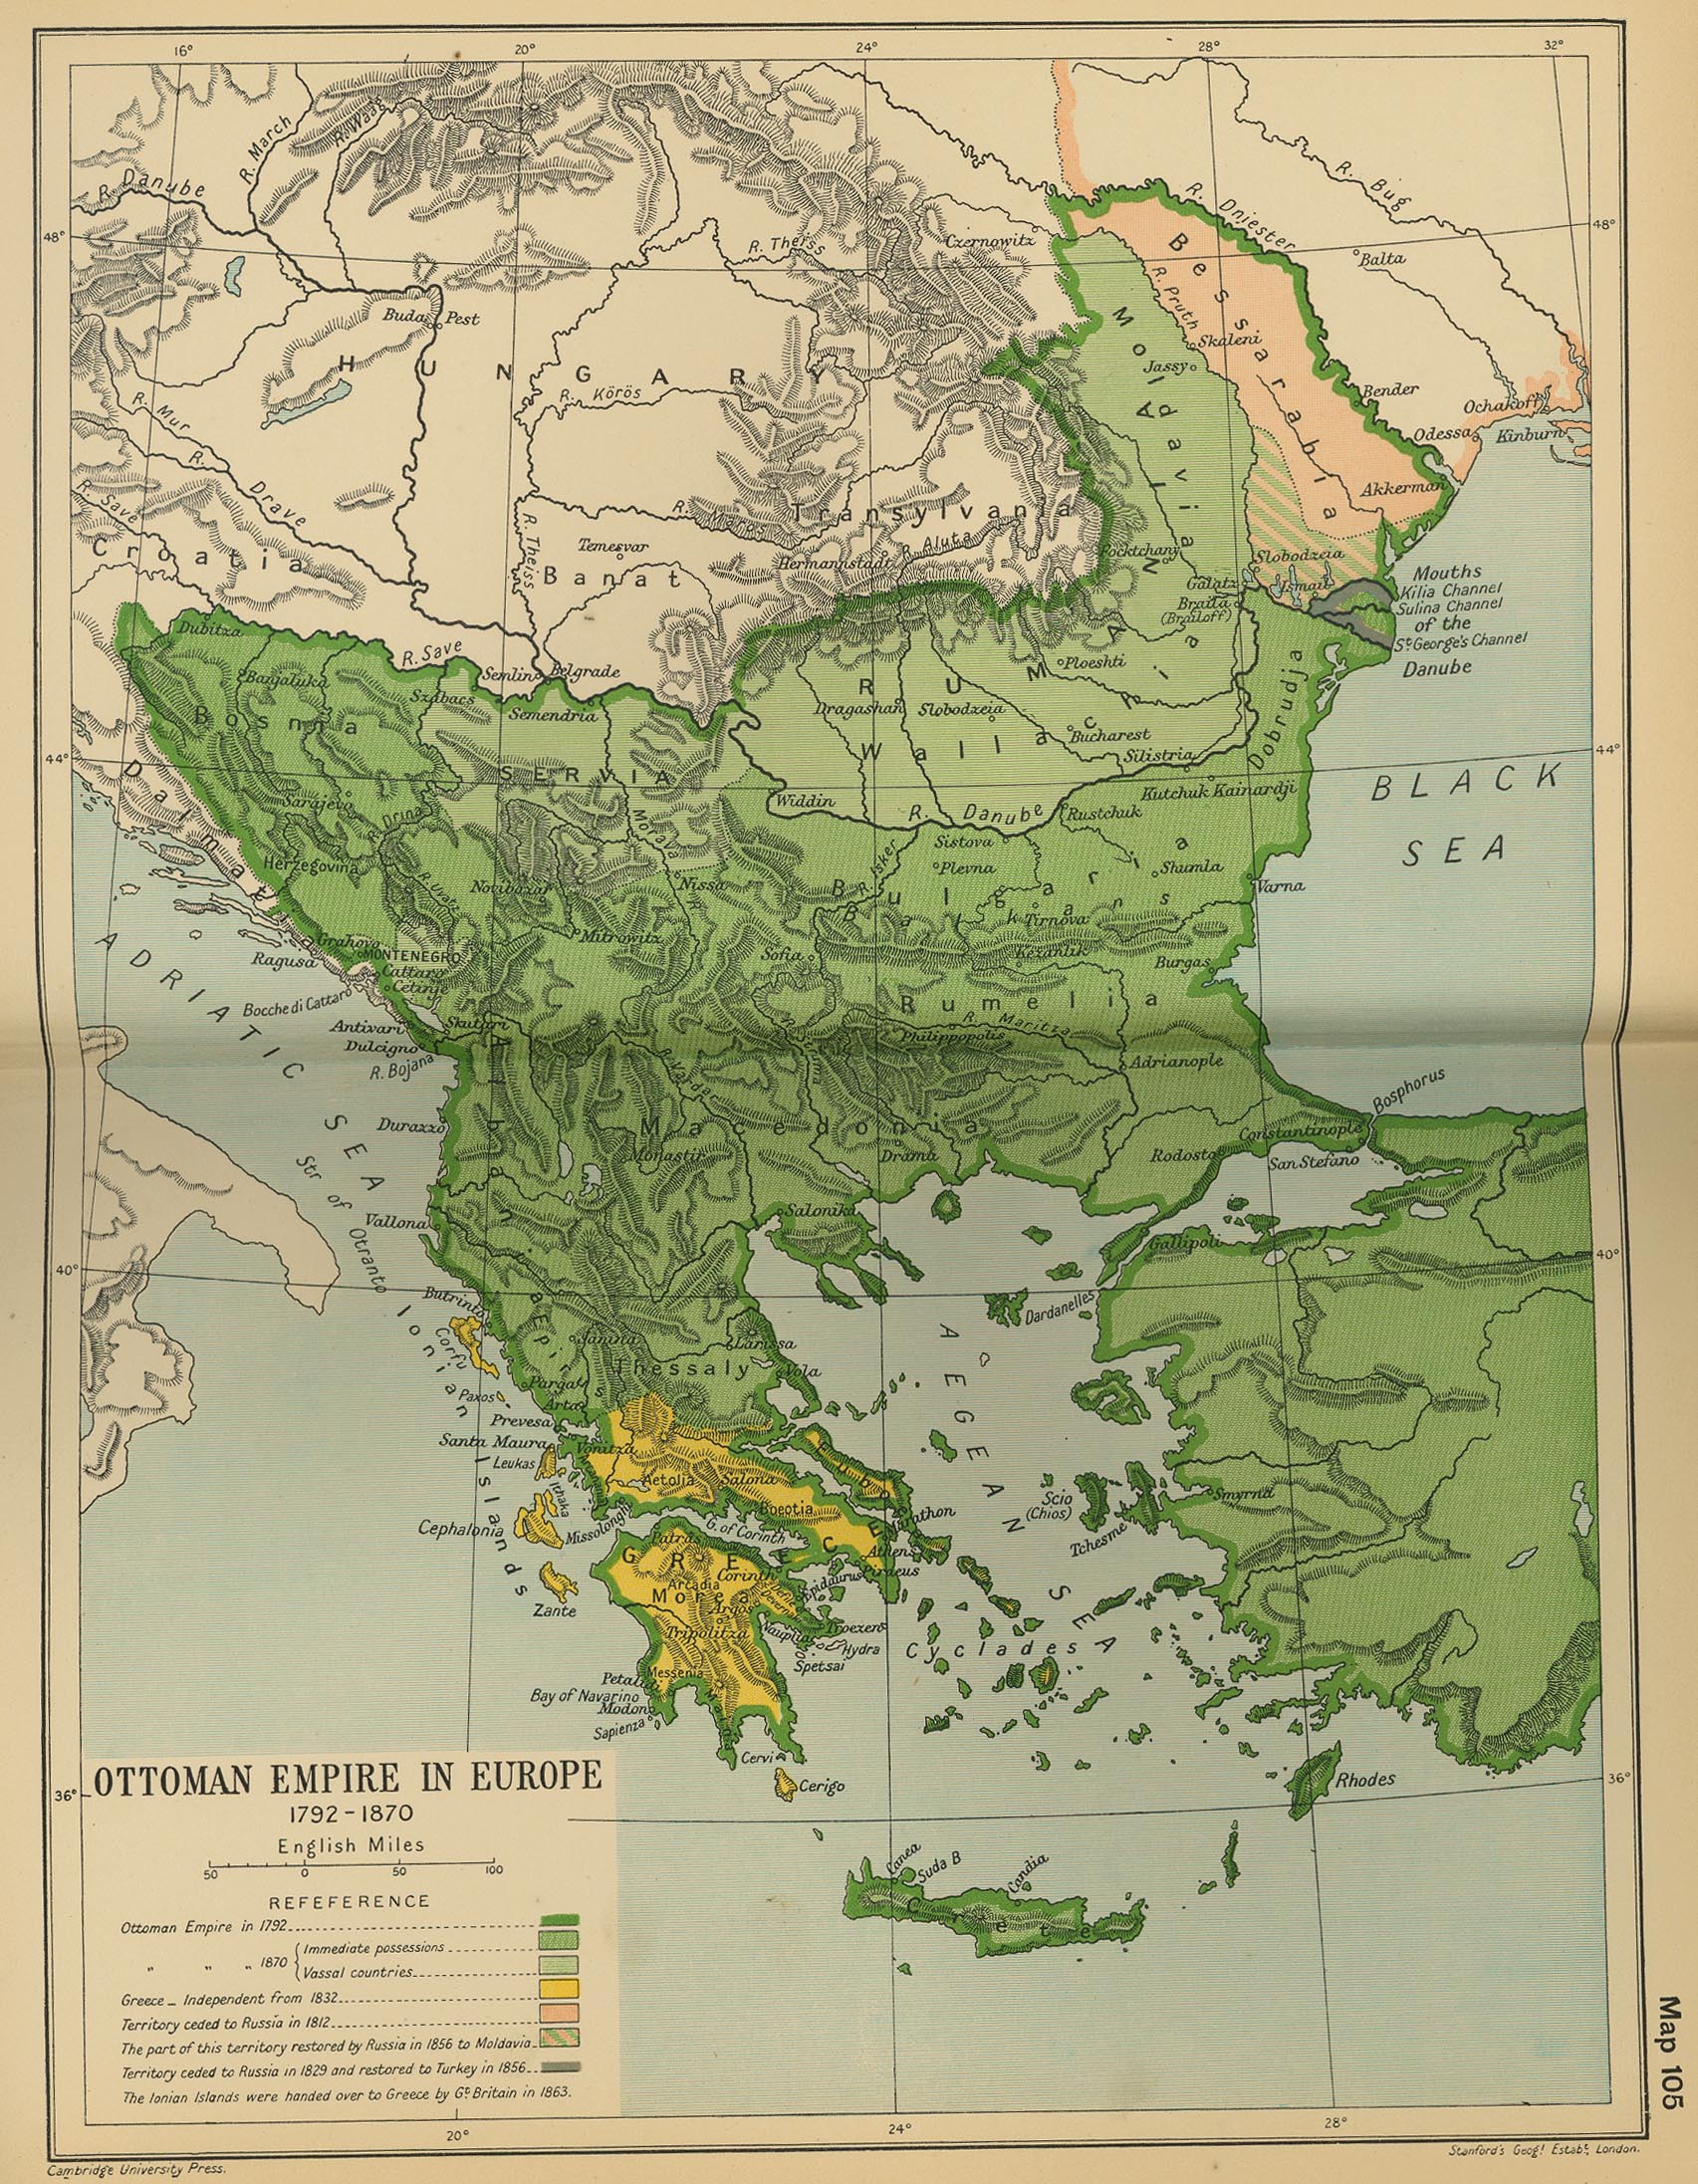 Map of the Ottoman Empire in Europe 1792-1870